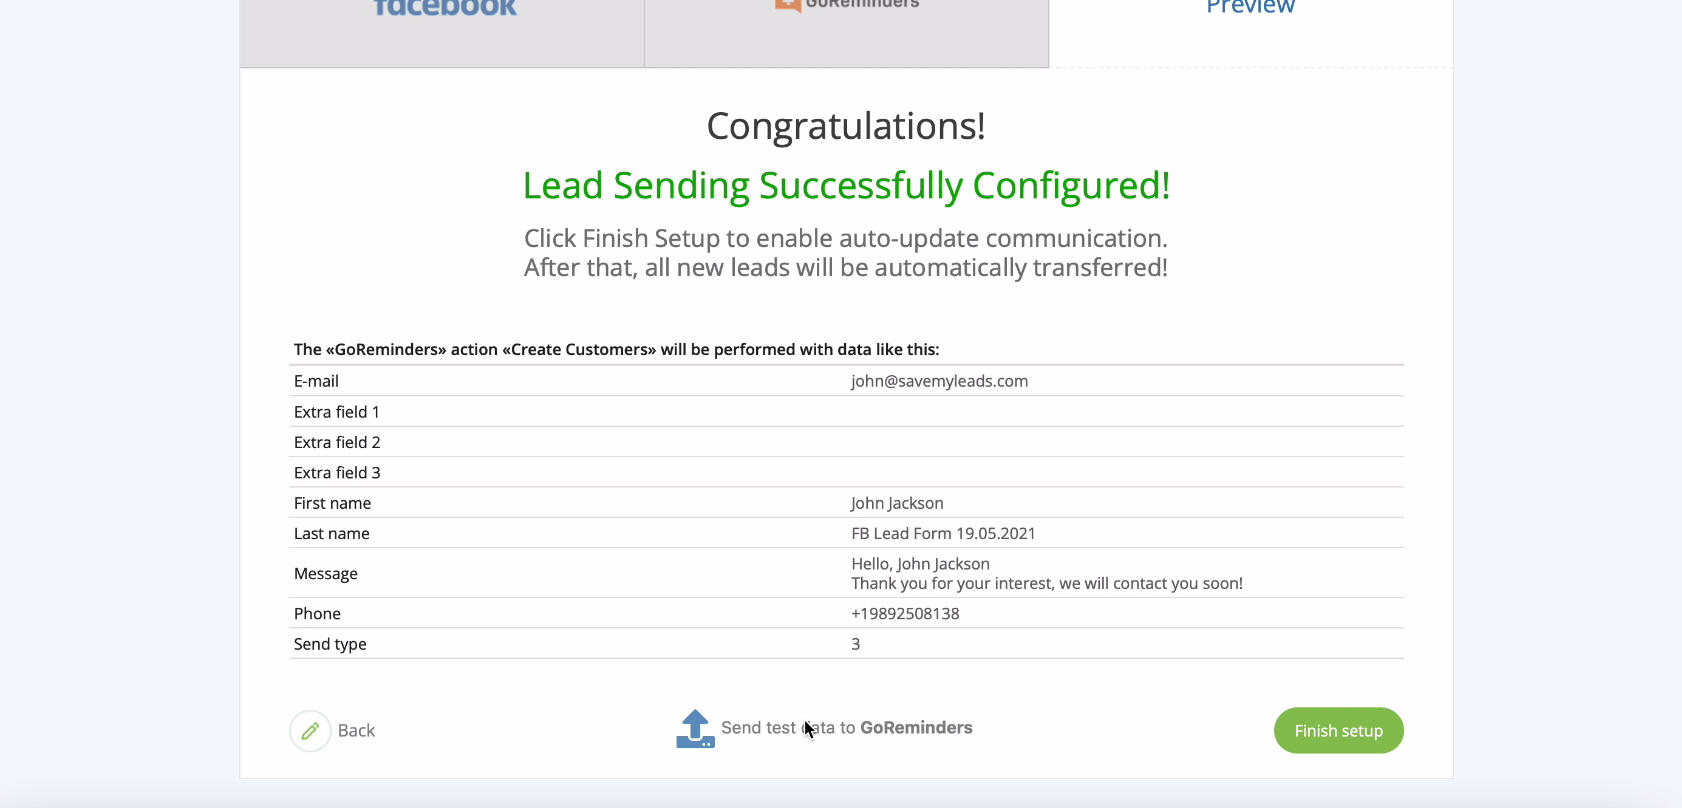 Facebook and GoReminders integration | Send test data to the mailing service